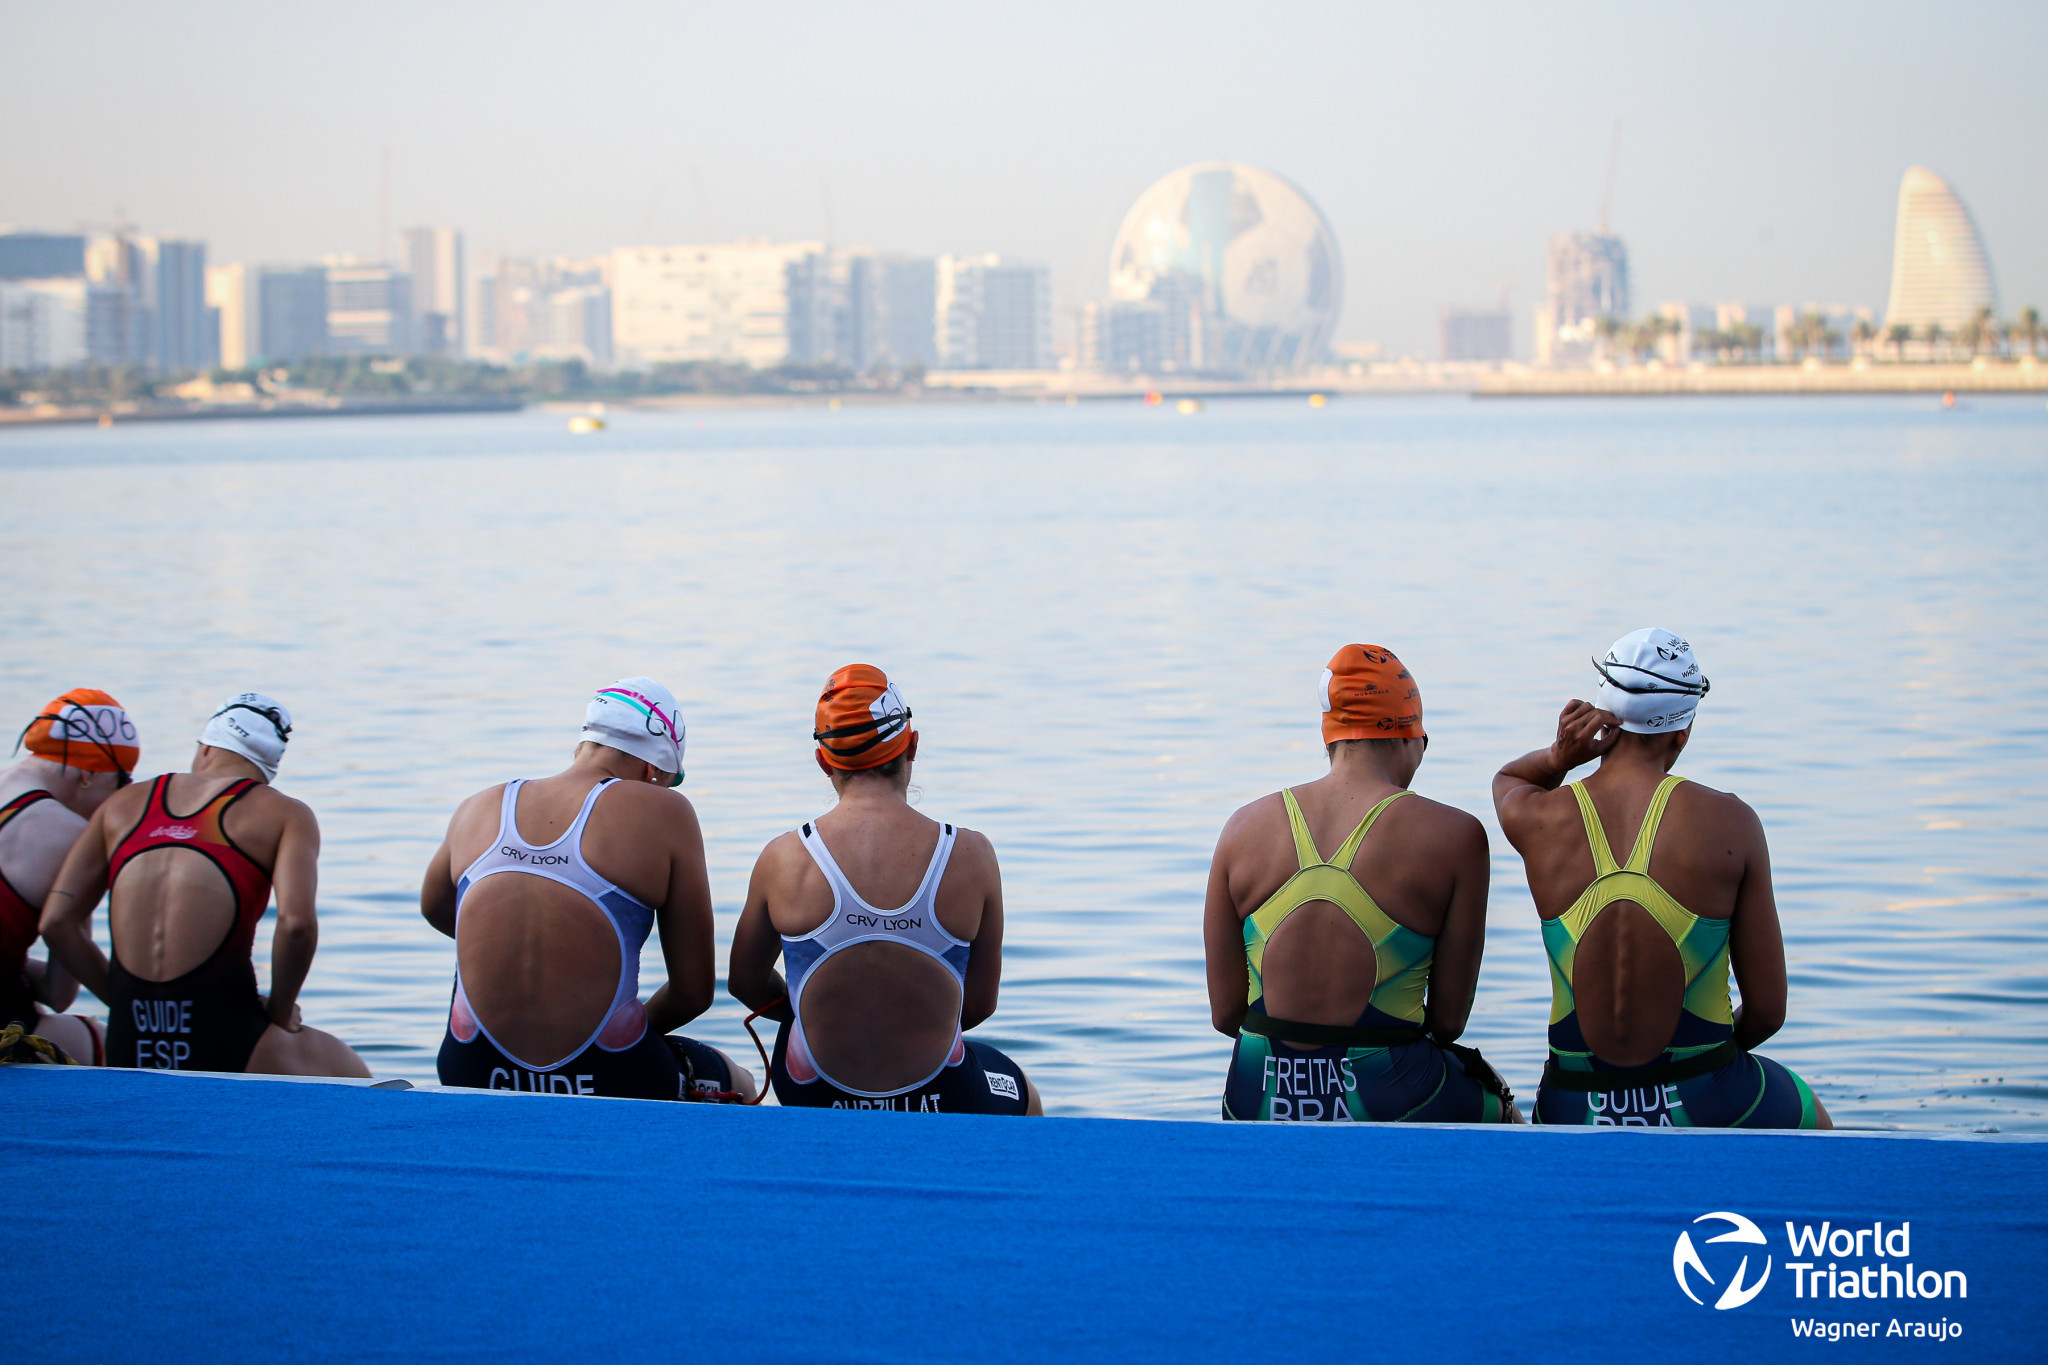 Updated rules establishing the use of swim skins have been introduced ©World Triathlon